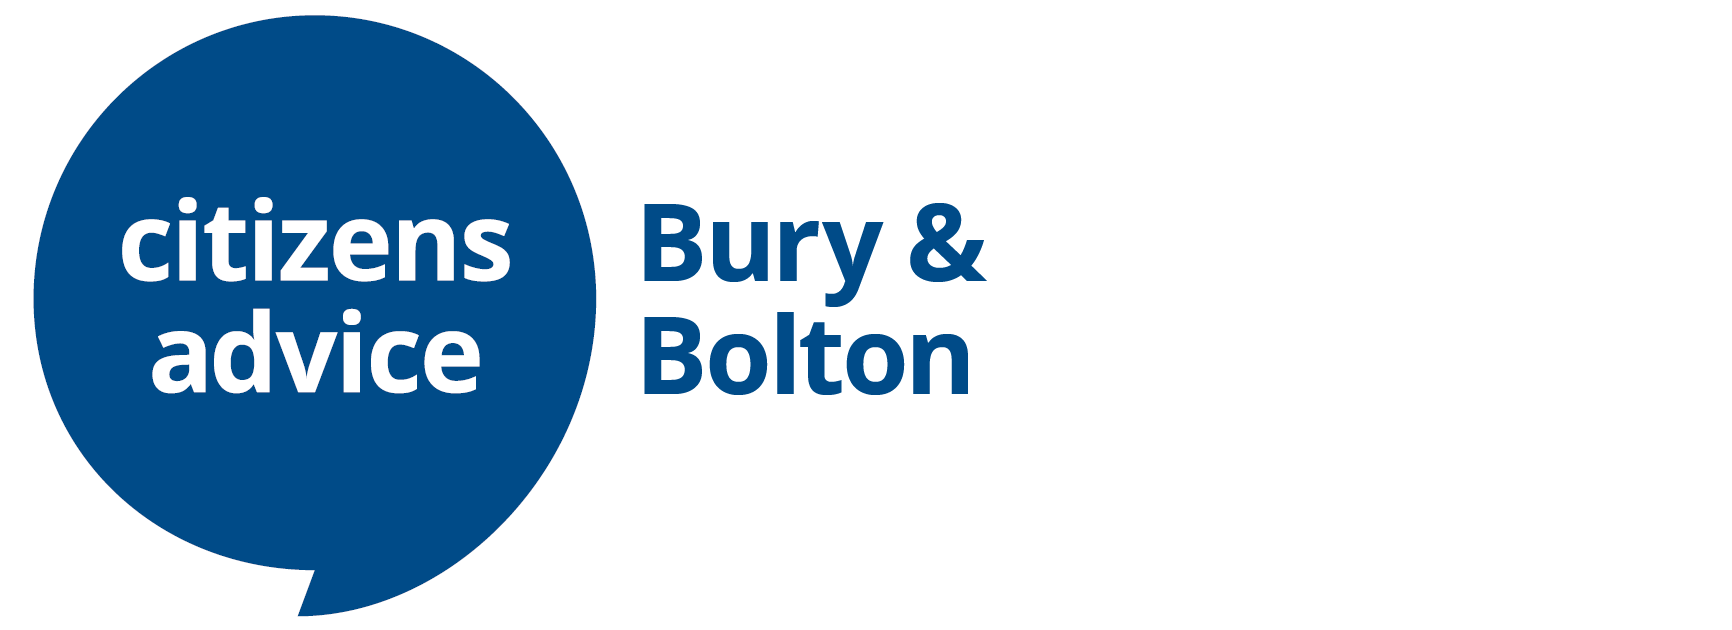 Job Ad: Citizens Advice Bury & Bolton are recruiting for an Accredited Immigration Supervisor/Solicitor